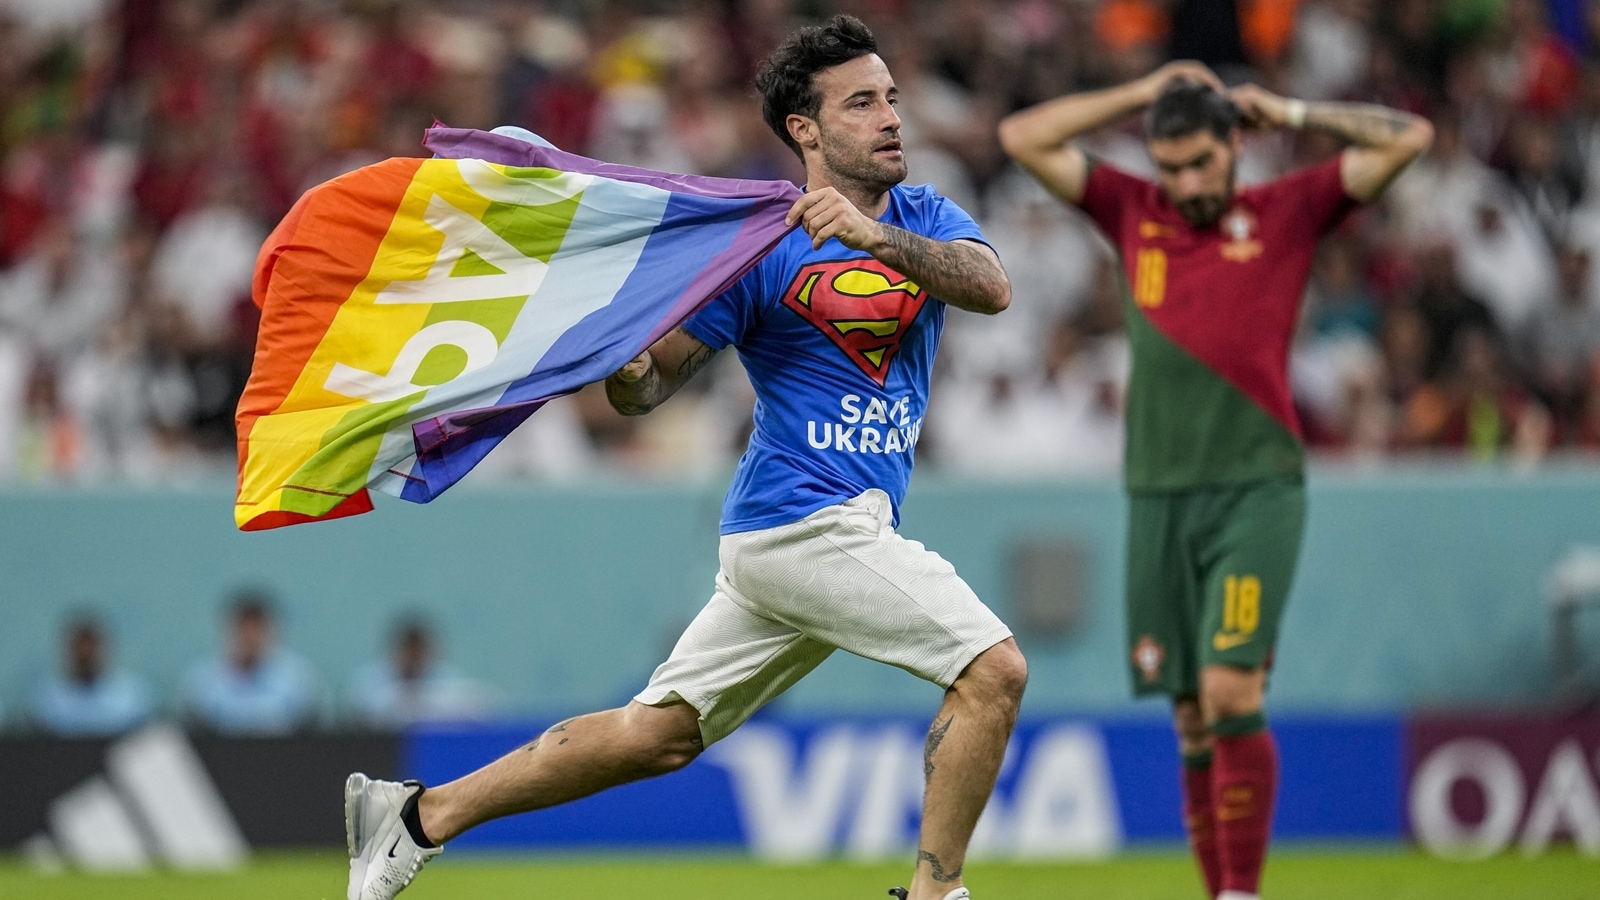 Spectator with rainbow flag runs onto field at World Cup